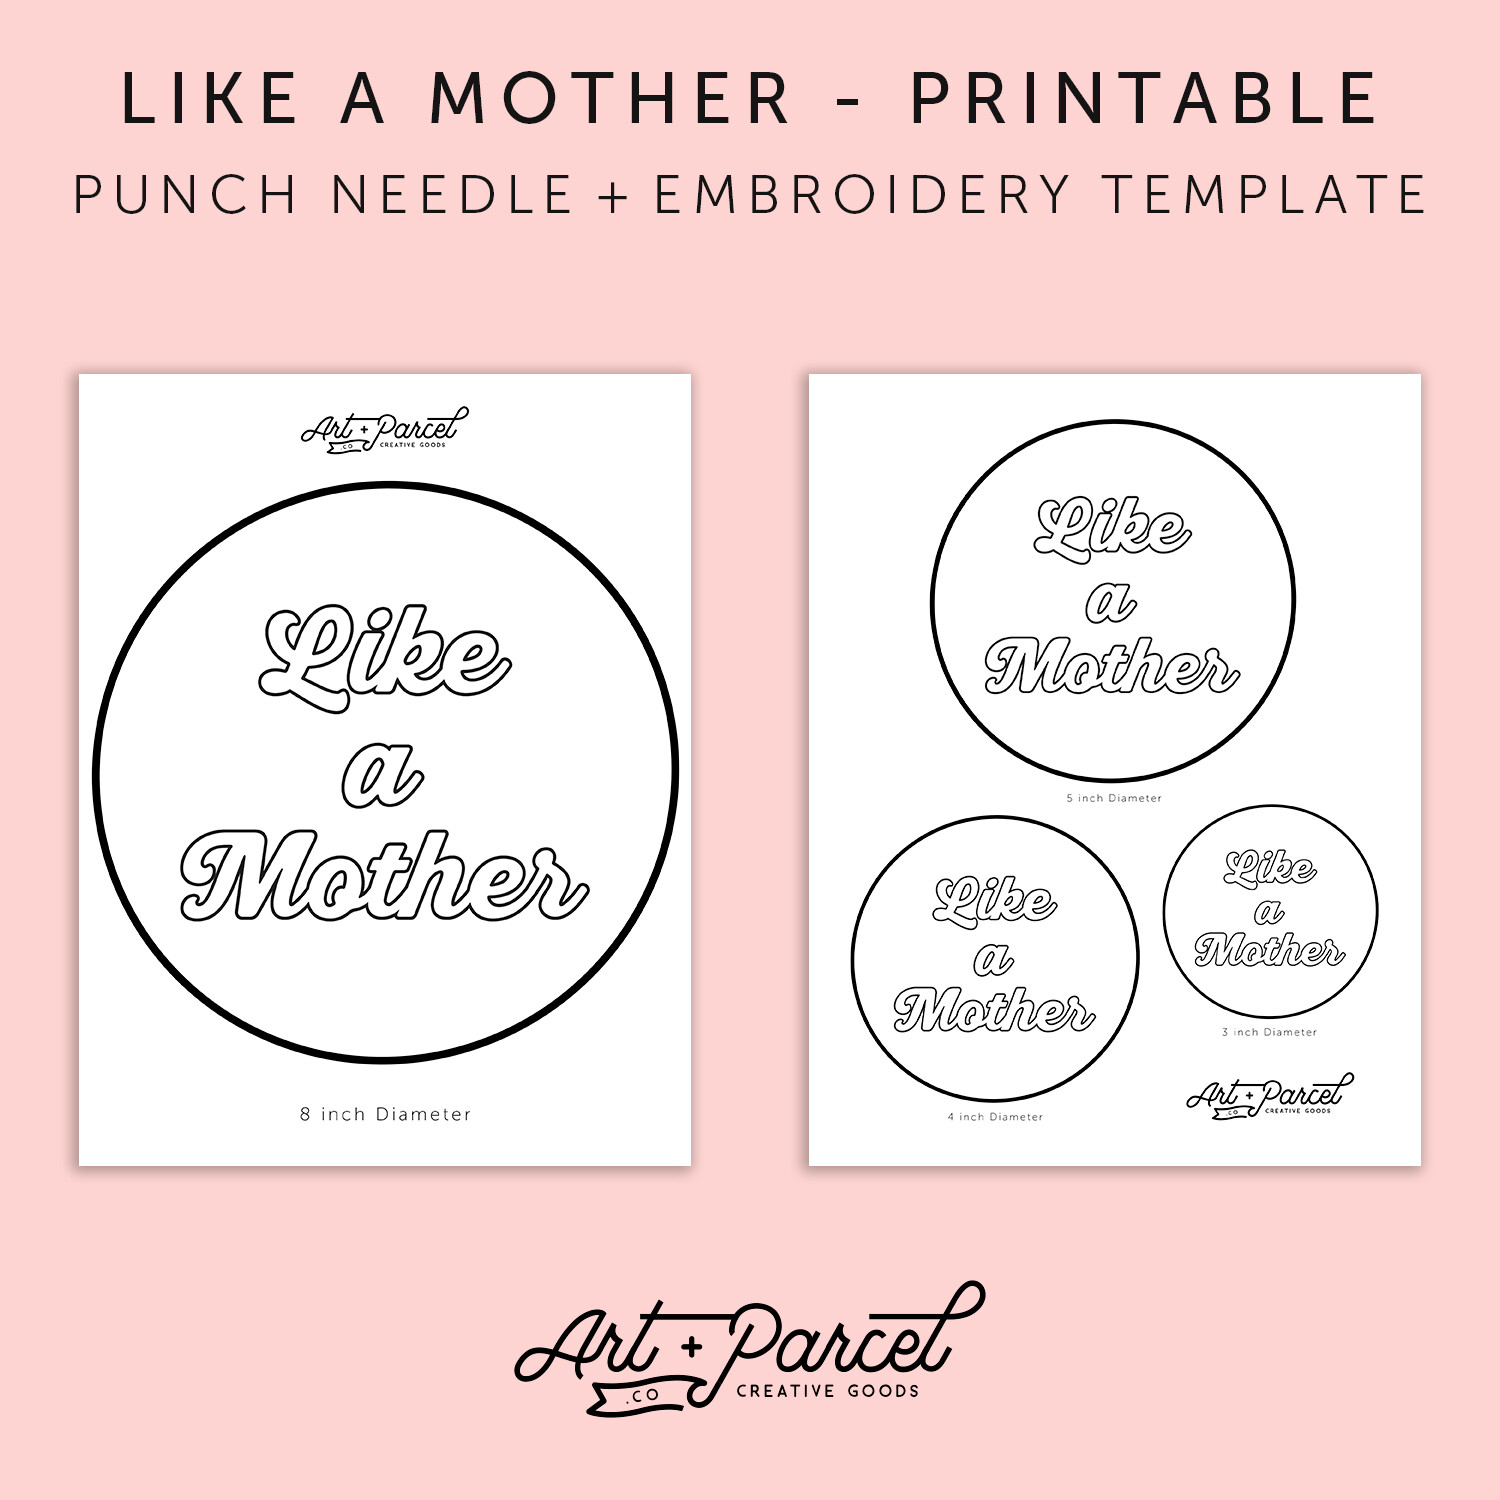 Like a Mother - Punch Needle/Embroidery Templates